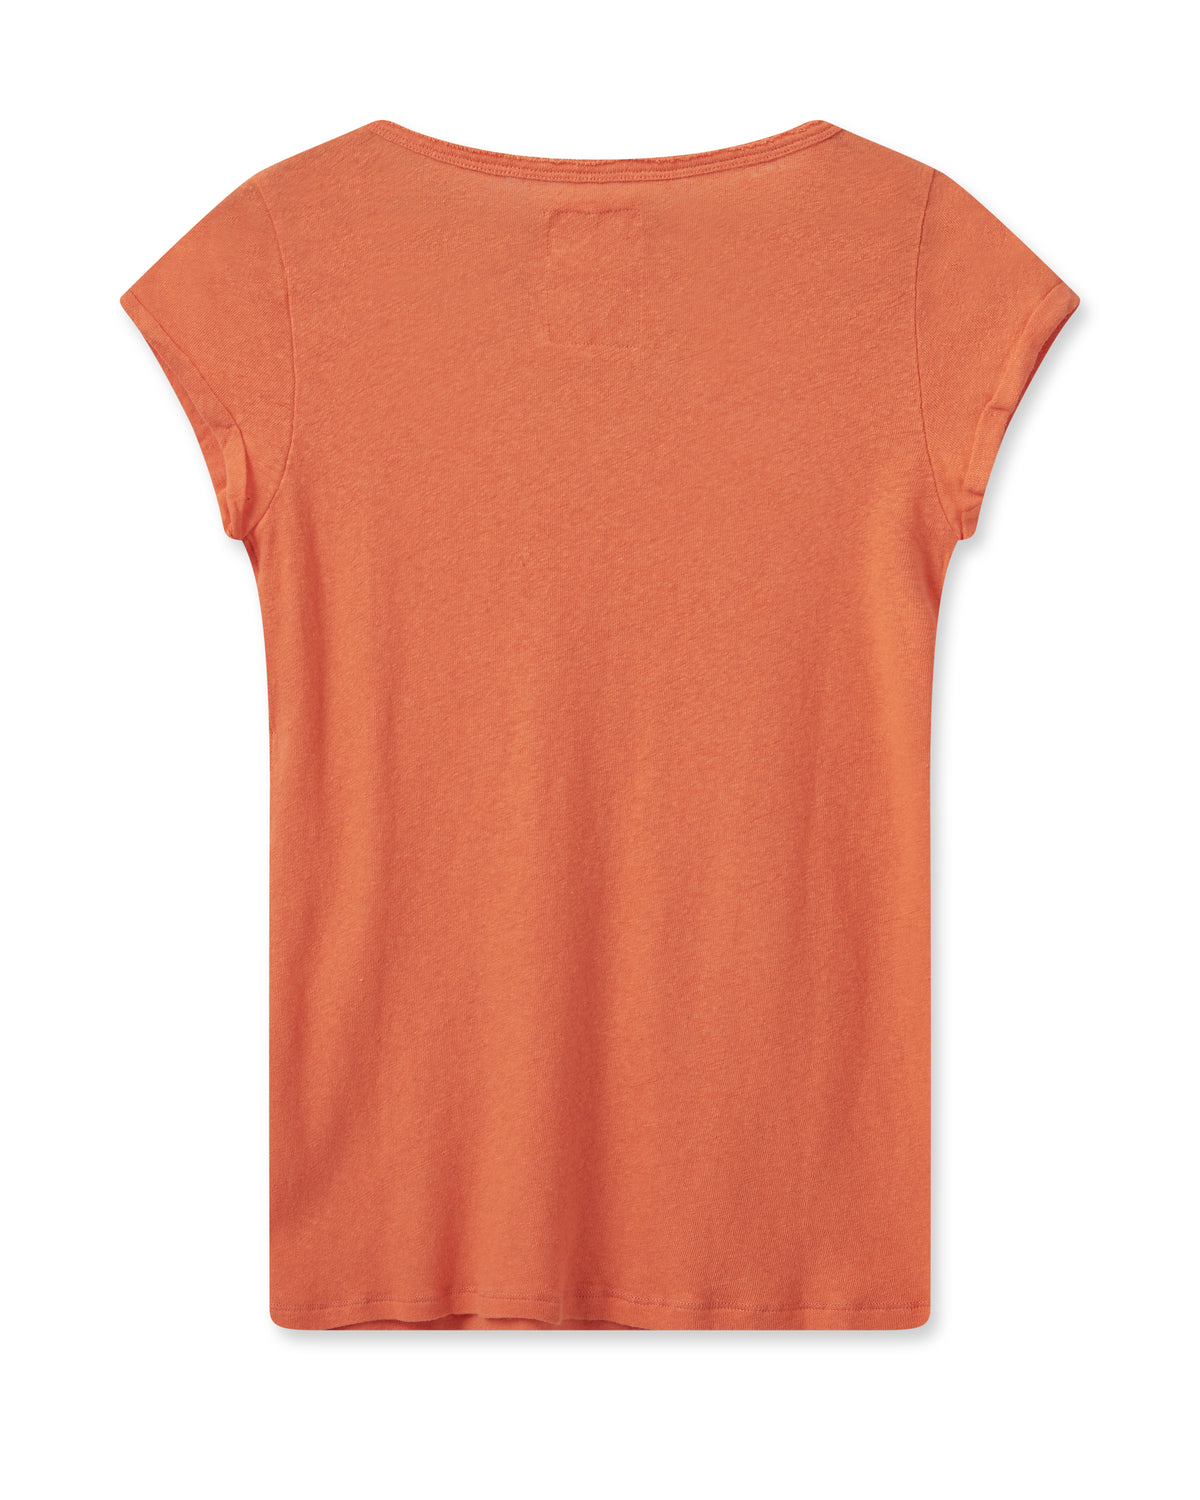 hot orange linen blend tee with a notch neck and short sleeves rear view